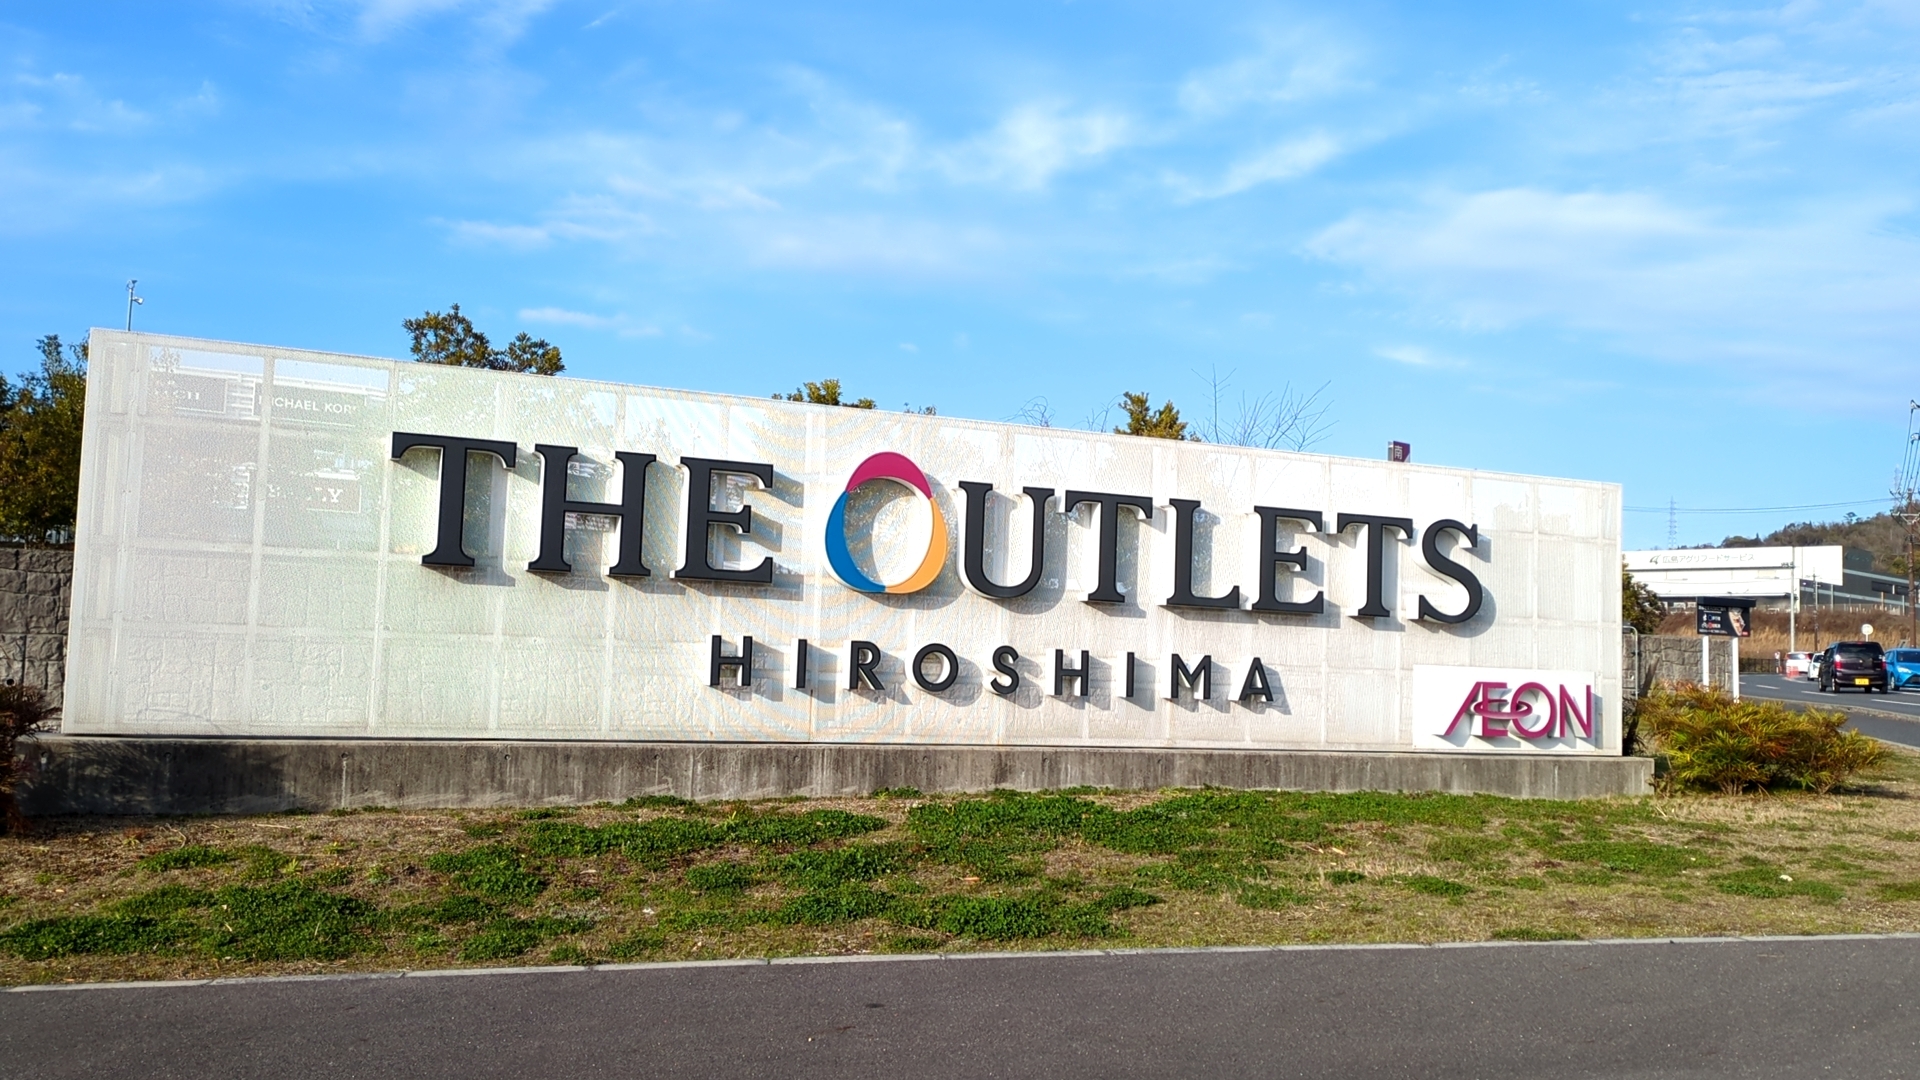 THE OUTLETSの入り口の看板